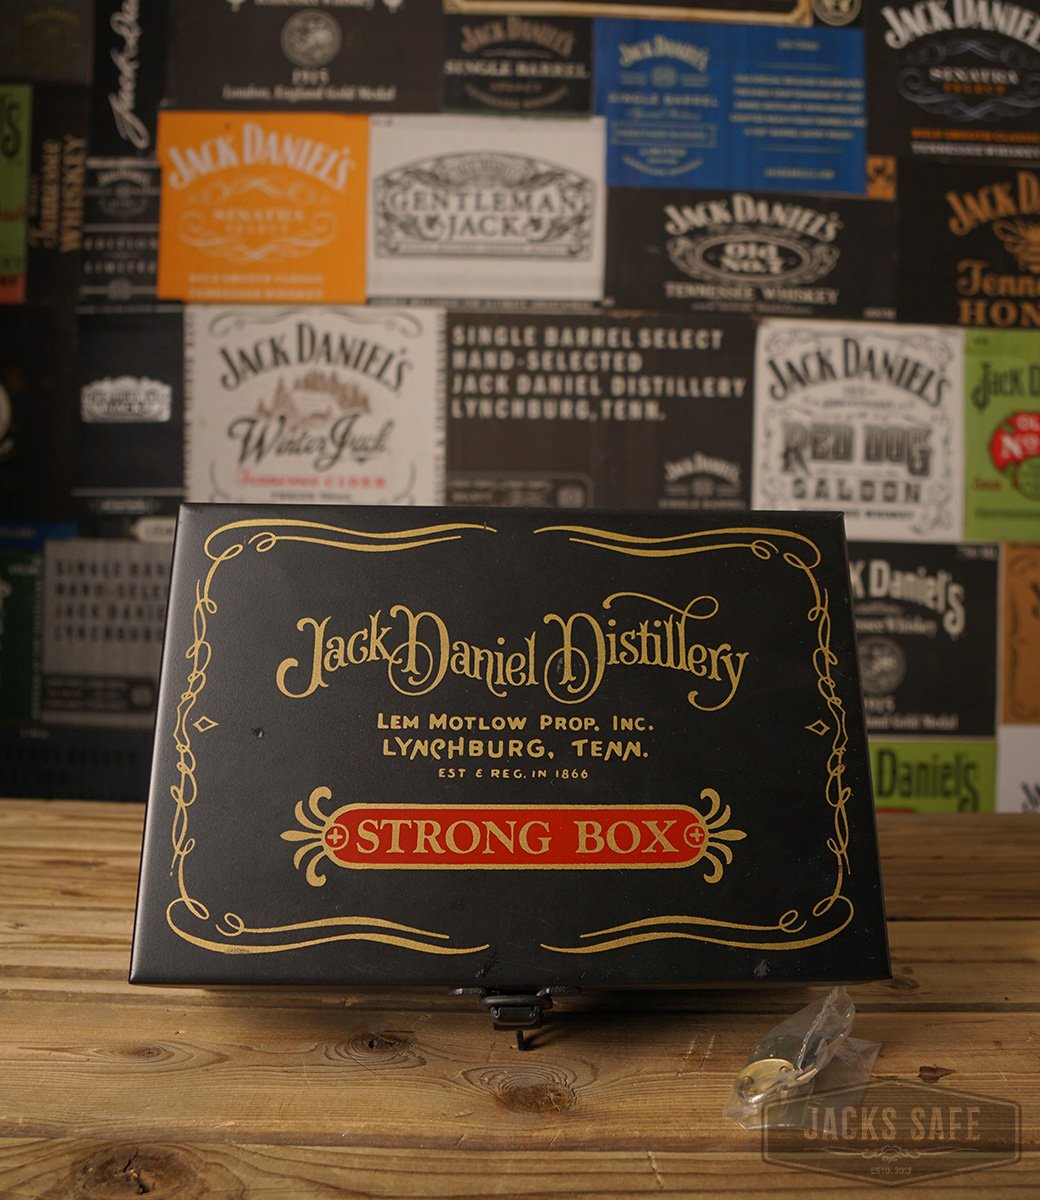 JACK DANIEL'S - OLD NR 7 - STRONG BOX - 2 X 500ML - FAKESEAL - IN BOX - BRAND NEW - 1982